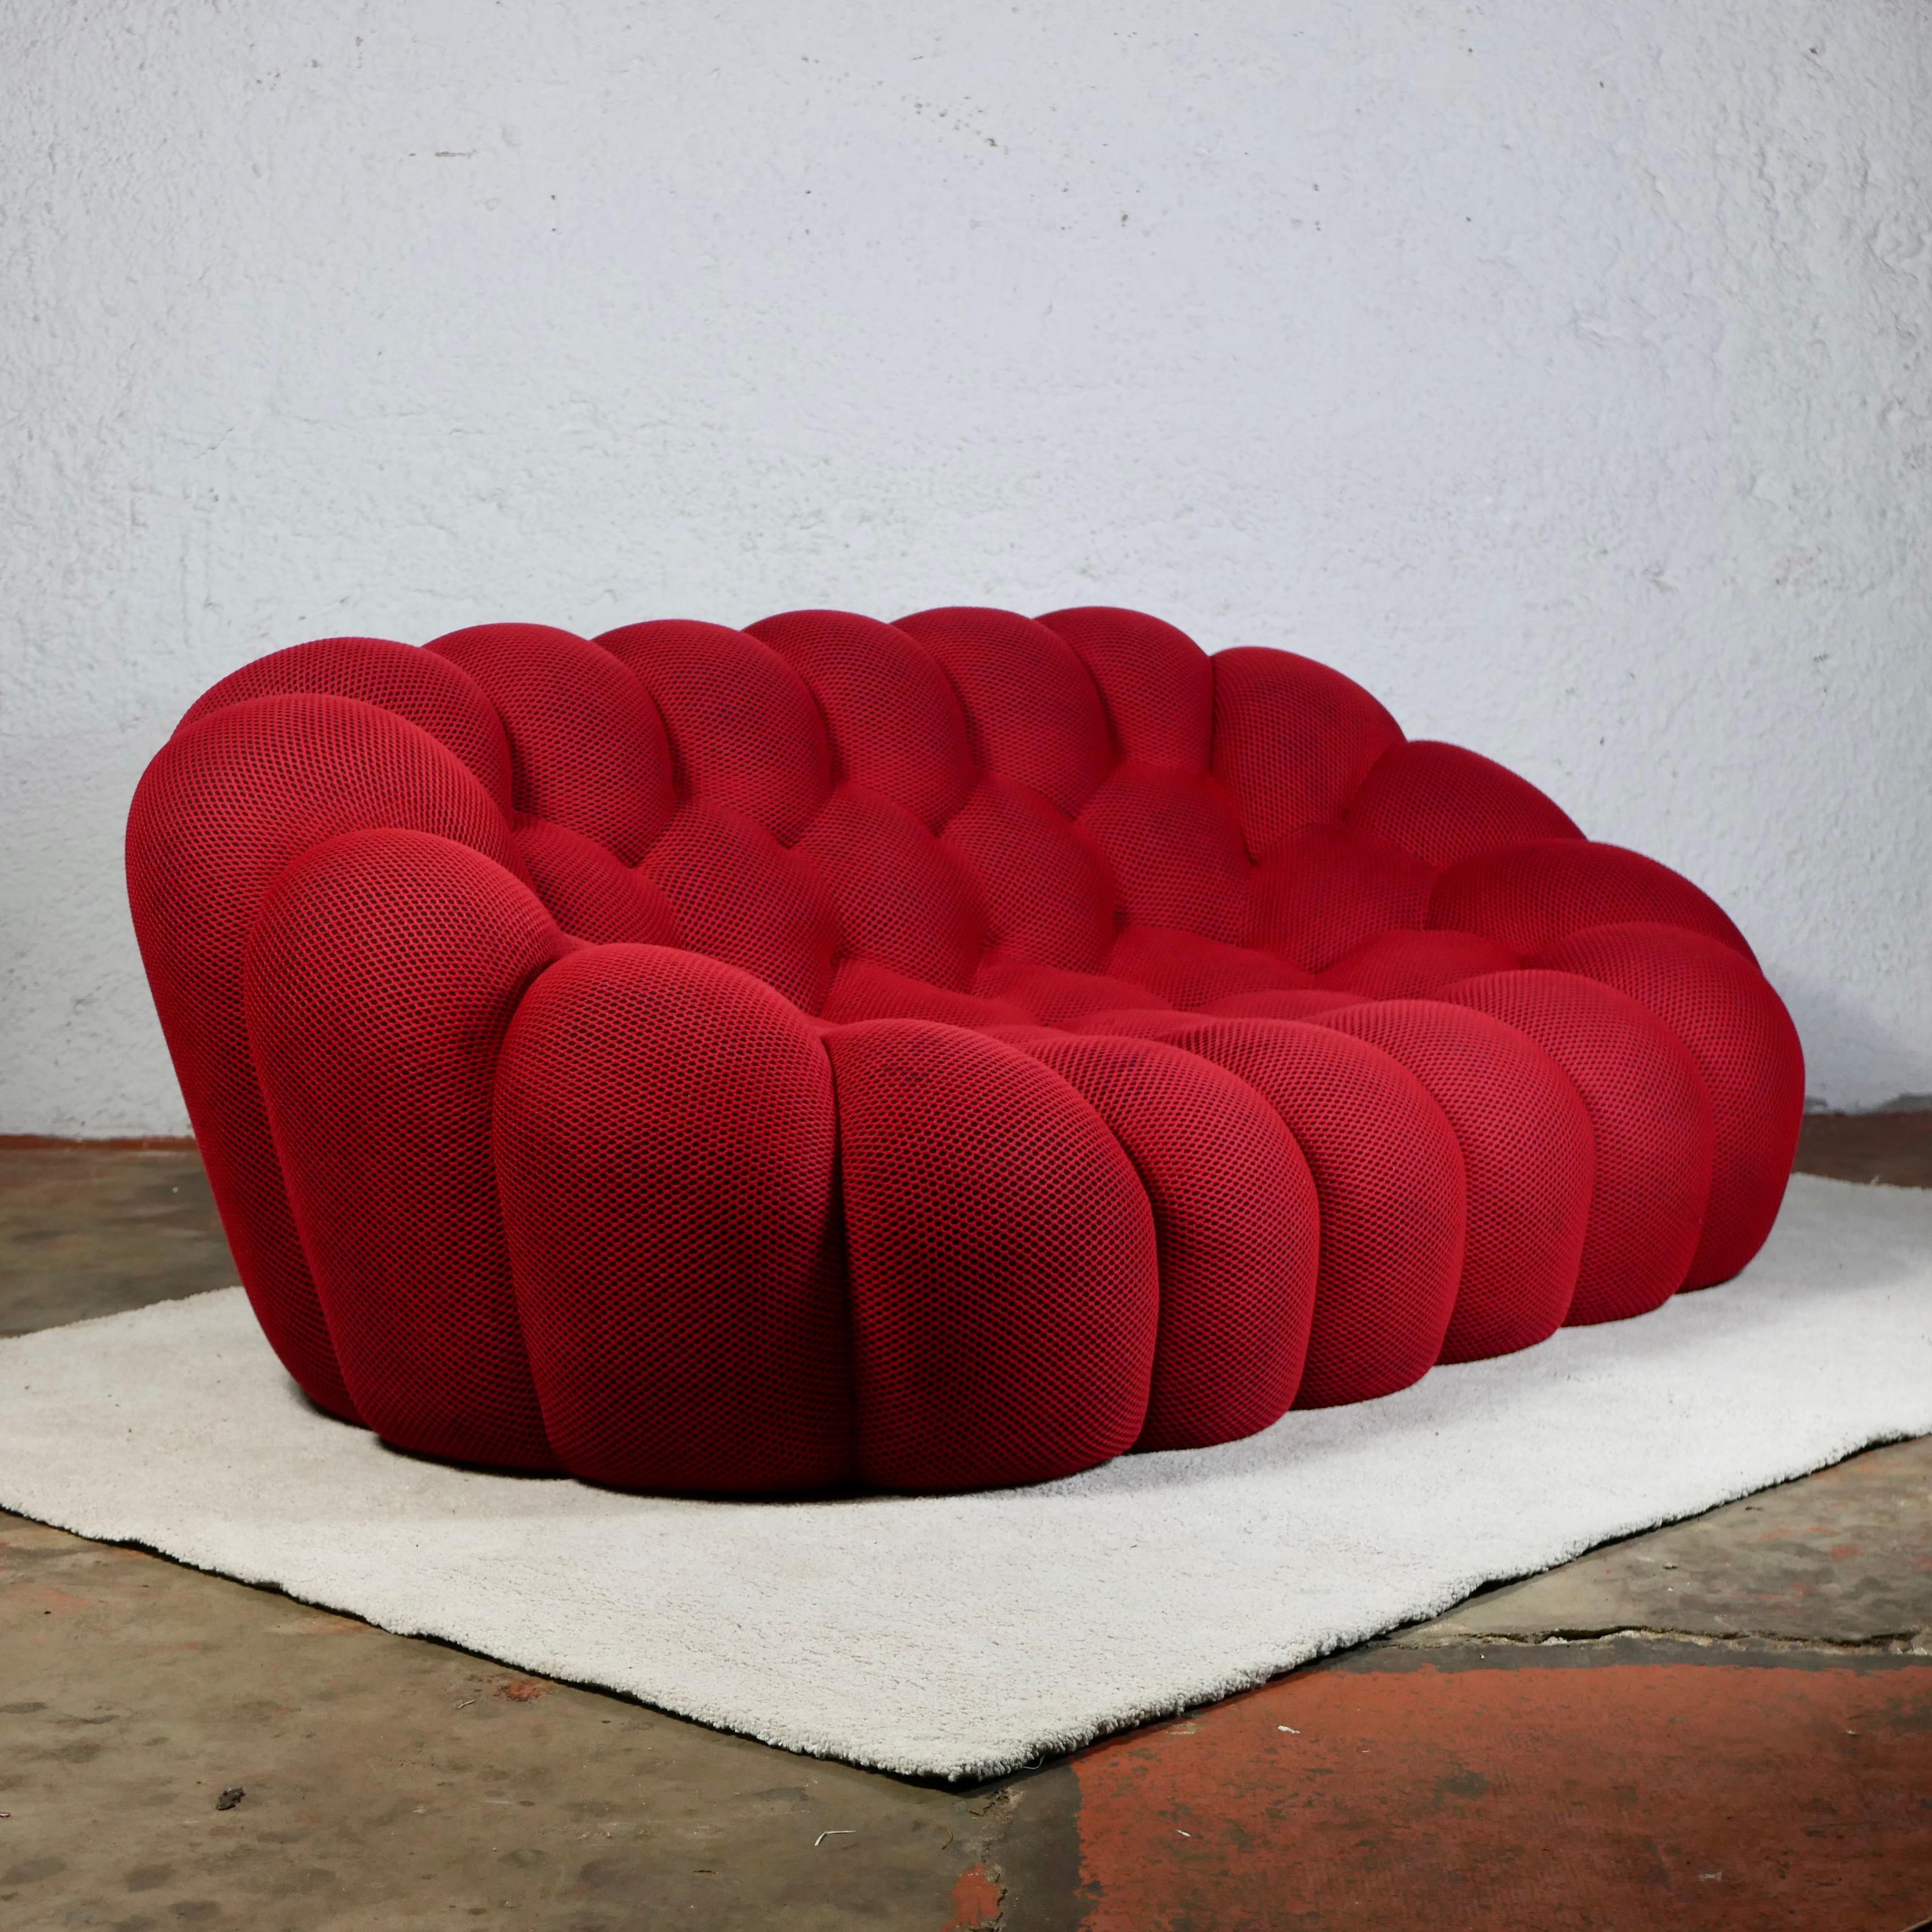 Stunning Bubble sofa, designed by Sacha Lakic in 2014 for Roche Bobois. Entirely handmade sofa in its original red Techno 3D fabric which perfectly follows the rounded and reassuring shapes of the sofa.
